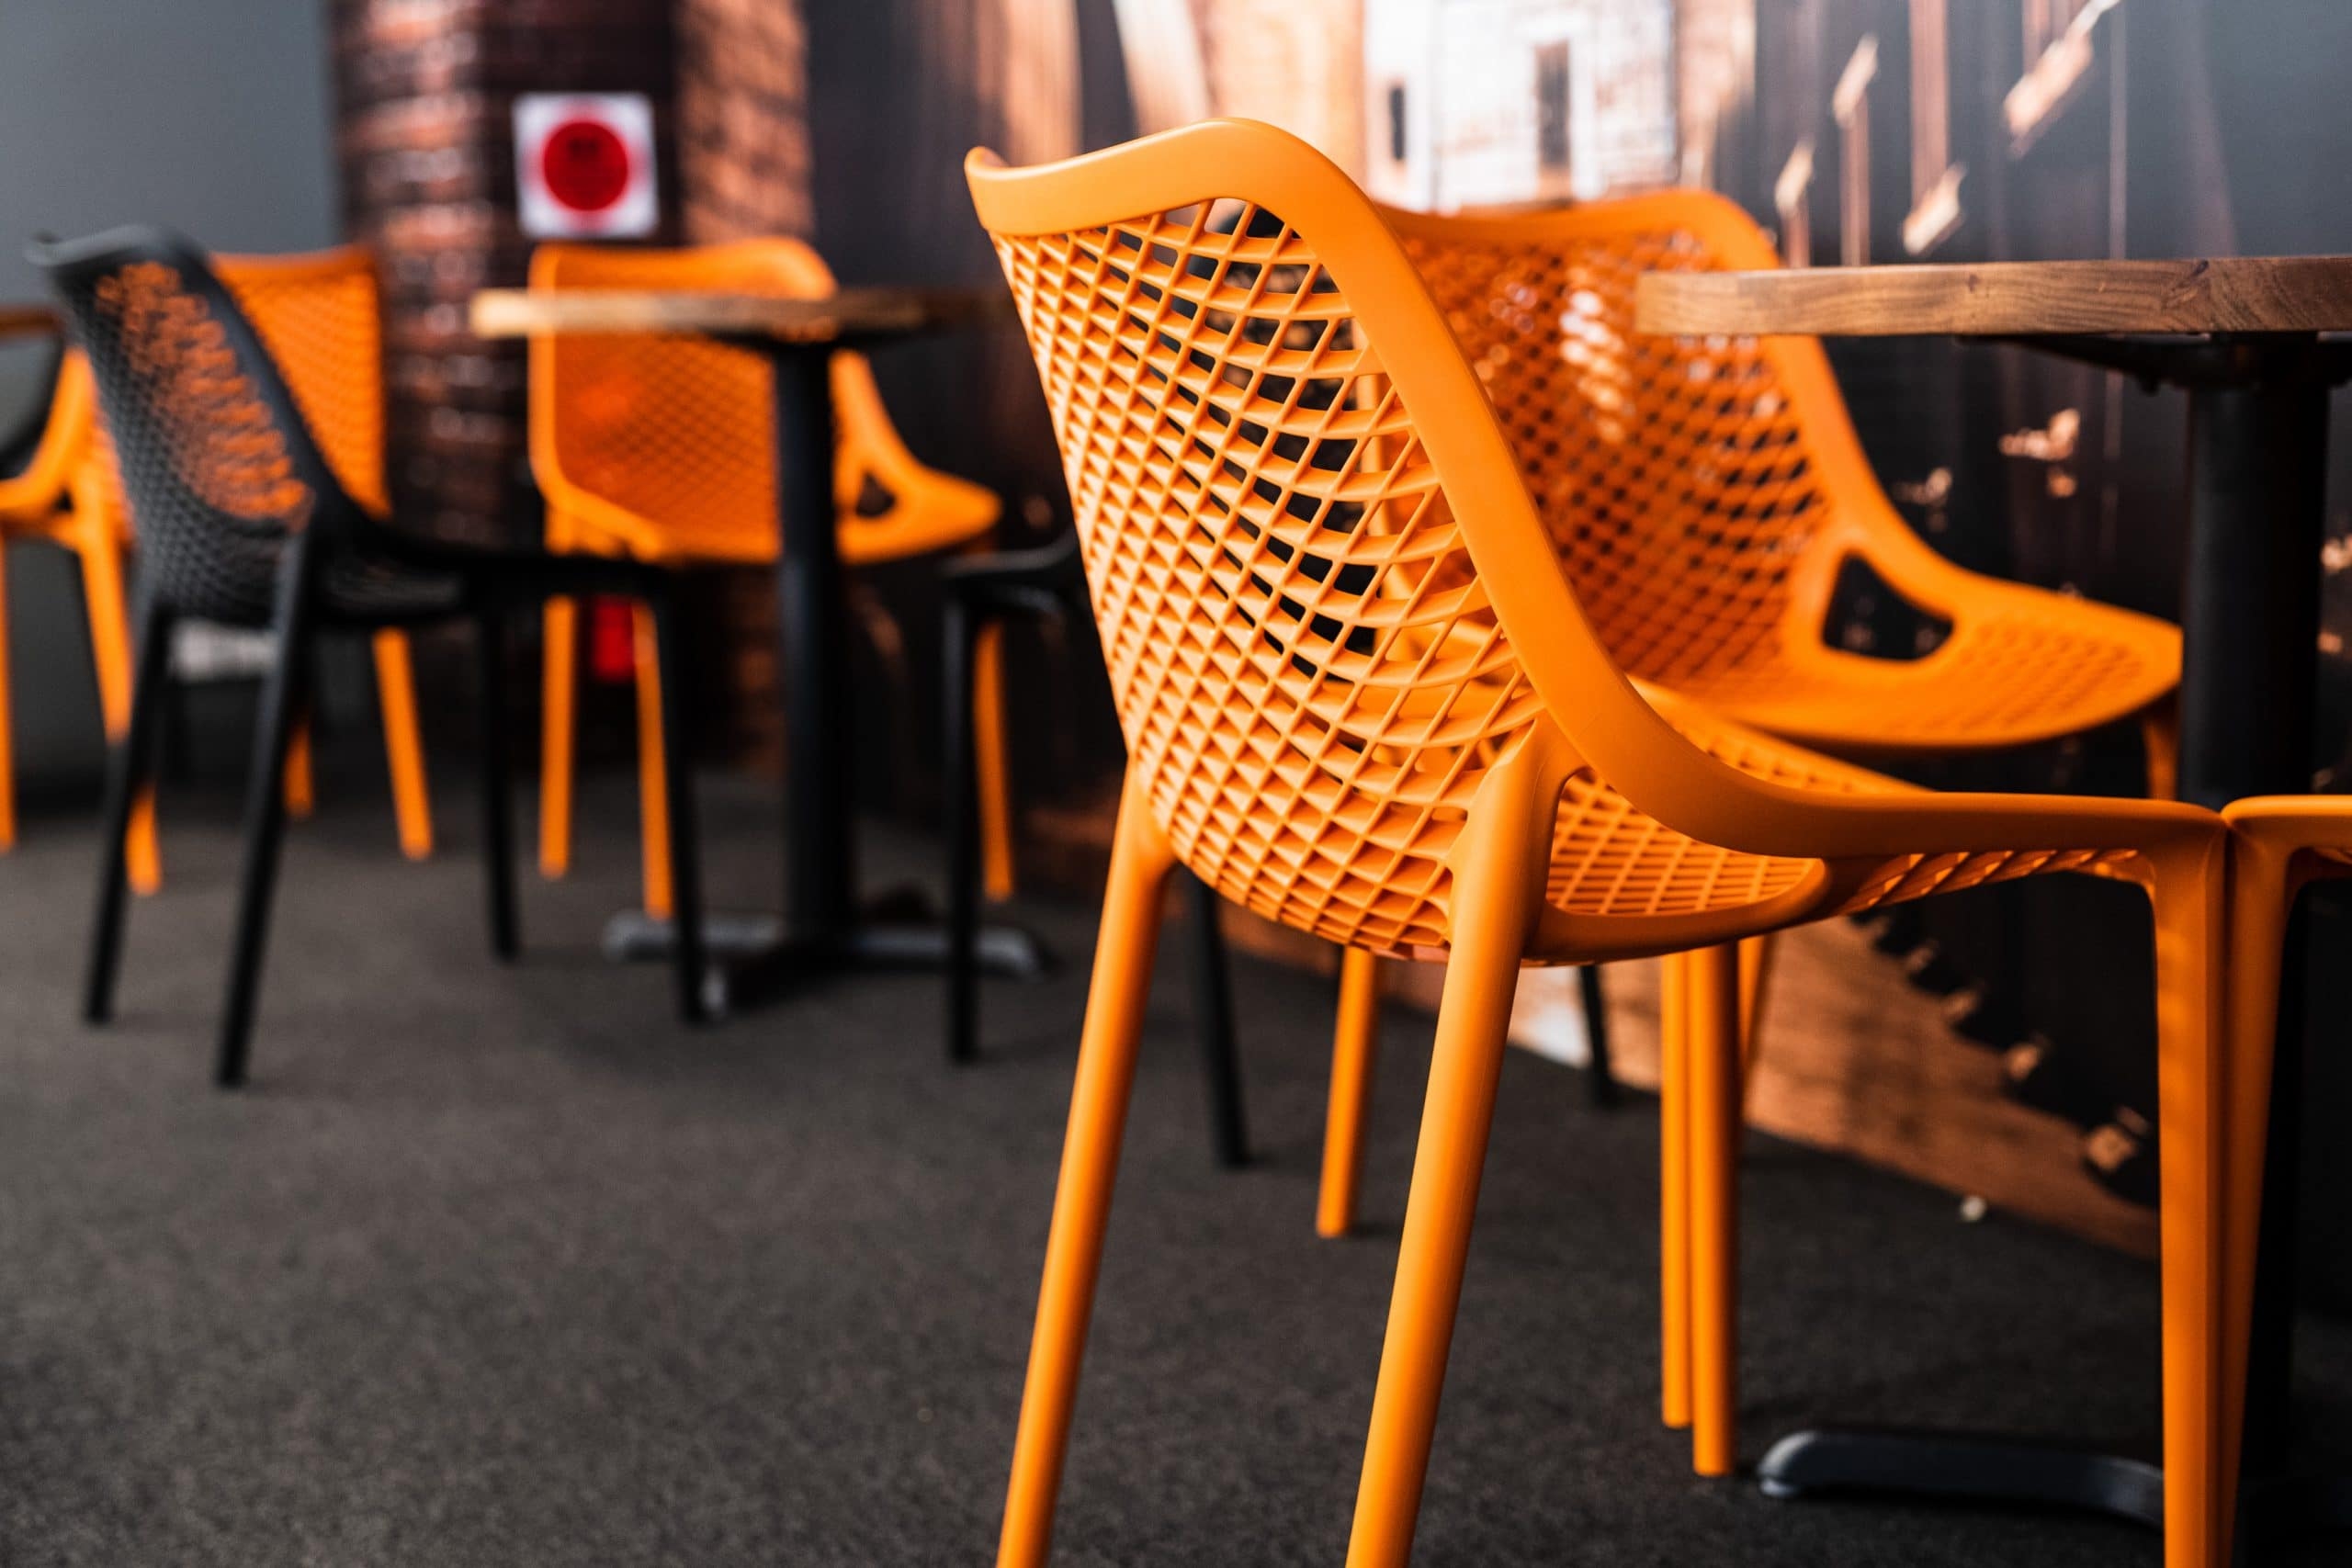 Cafe Chairs Perth Metal Polypropylene Chairs Adage Furniture Perth